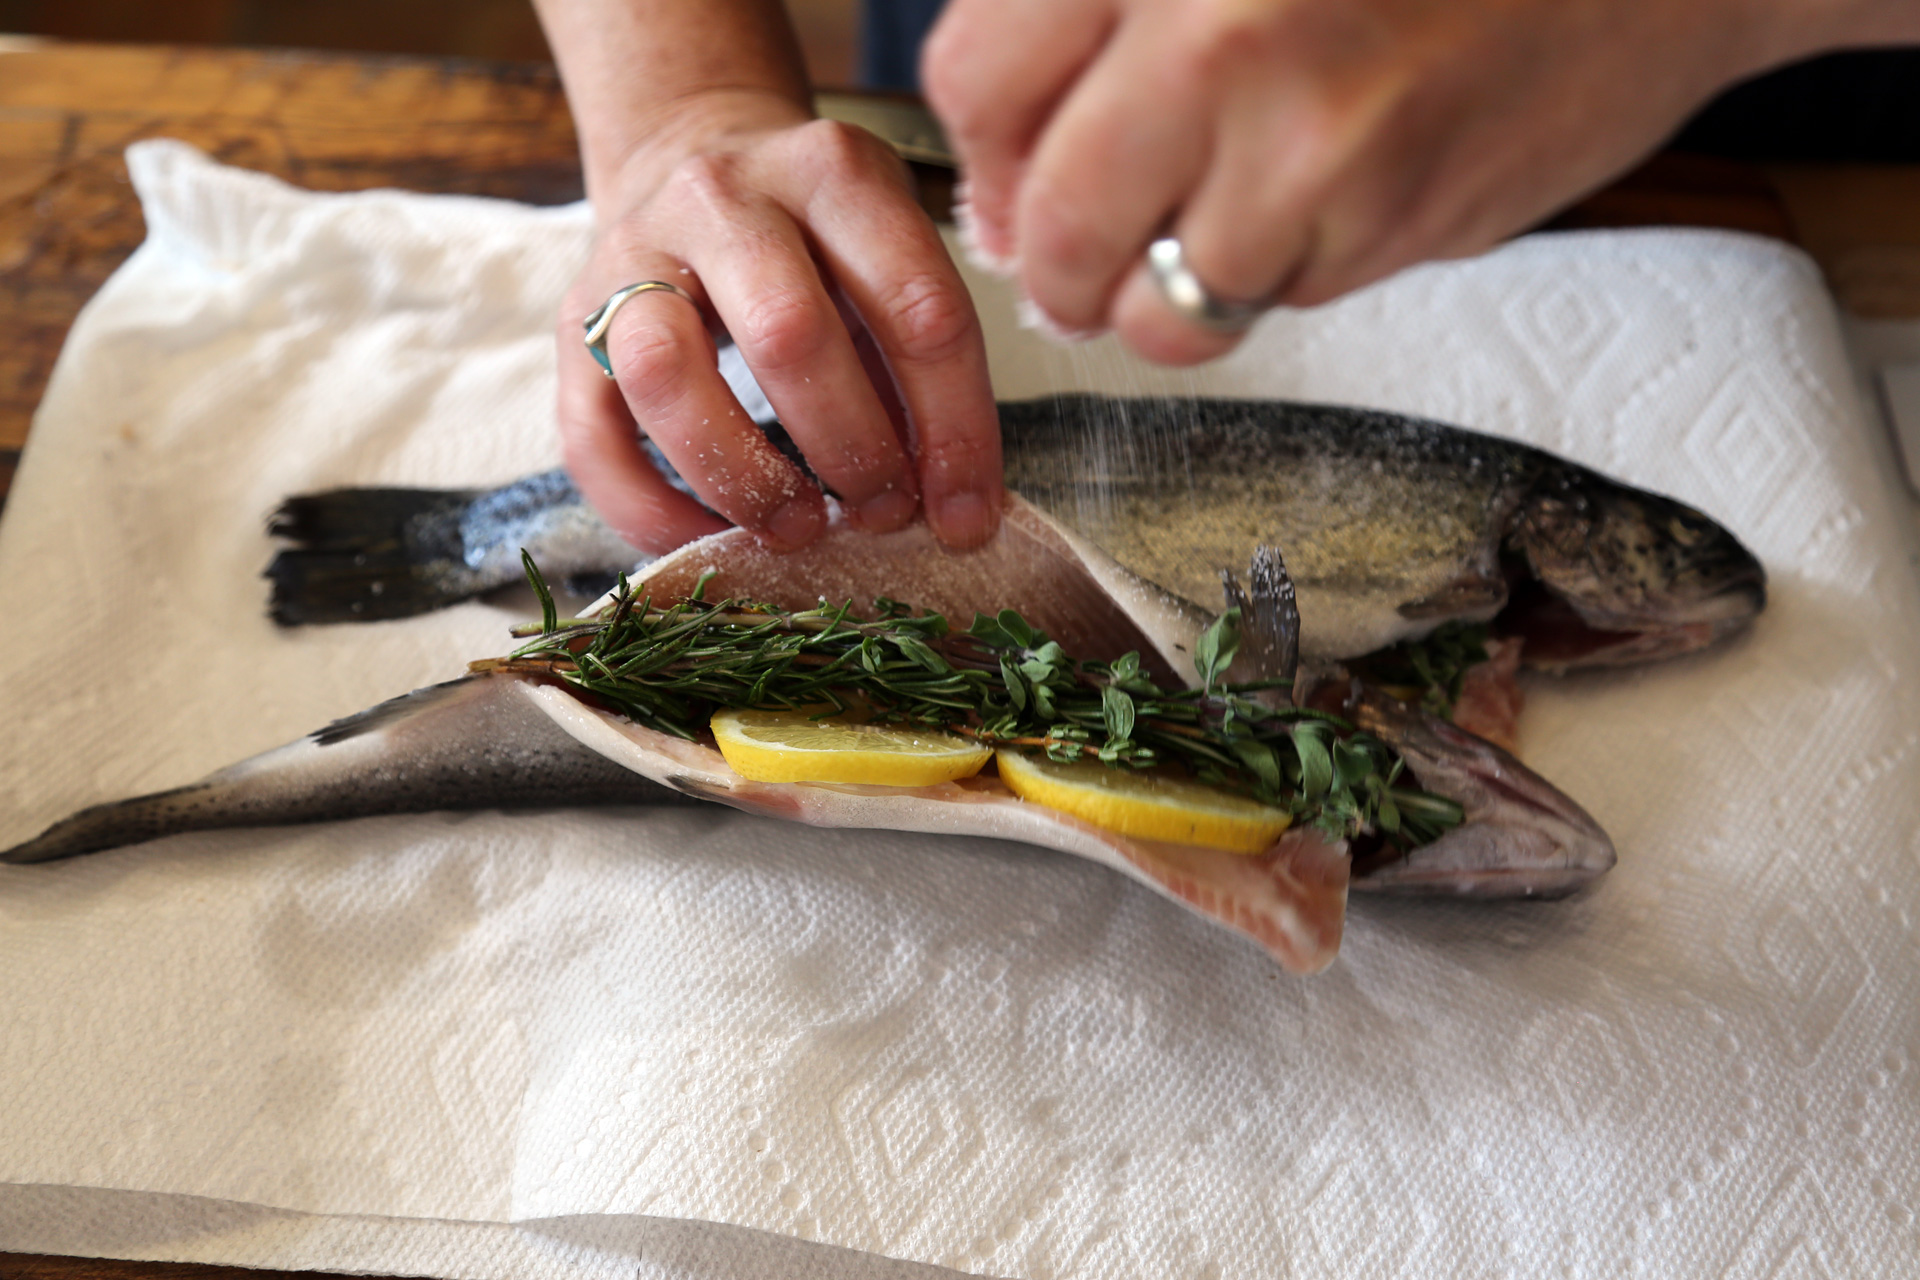 Sprinkle the cavity of each trout with salt. Stuff each trout with lemon slices and herb sprigs.